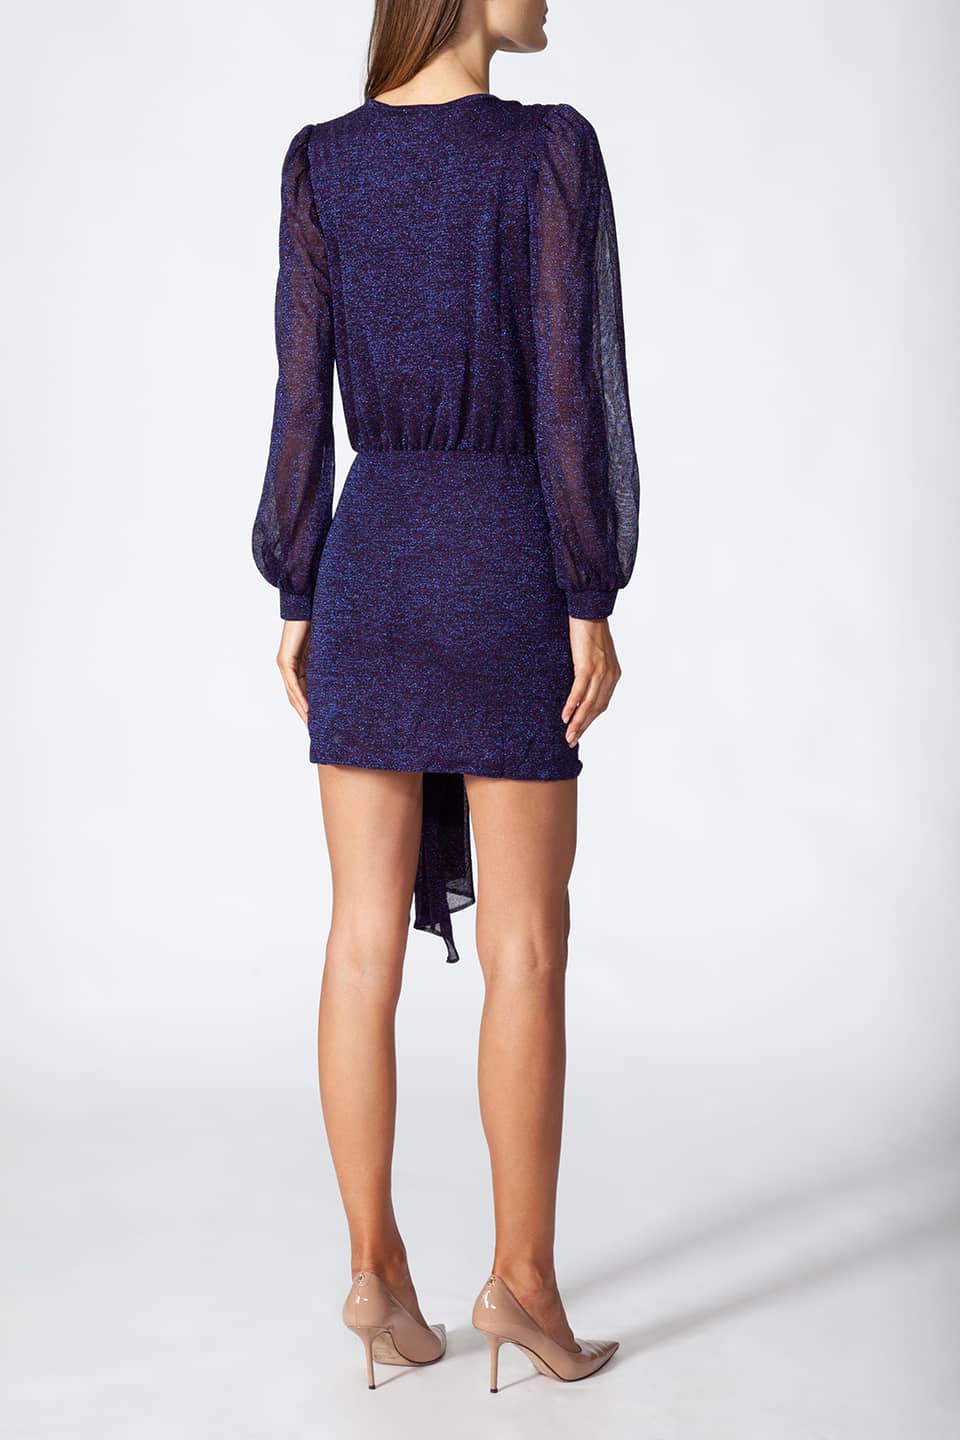 Thumbnail for Product gallery 5, Model in pose from behind, wearing fashion designer Kukhareva London mini dress with long sleeve in purple color and shimmering material.